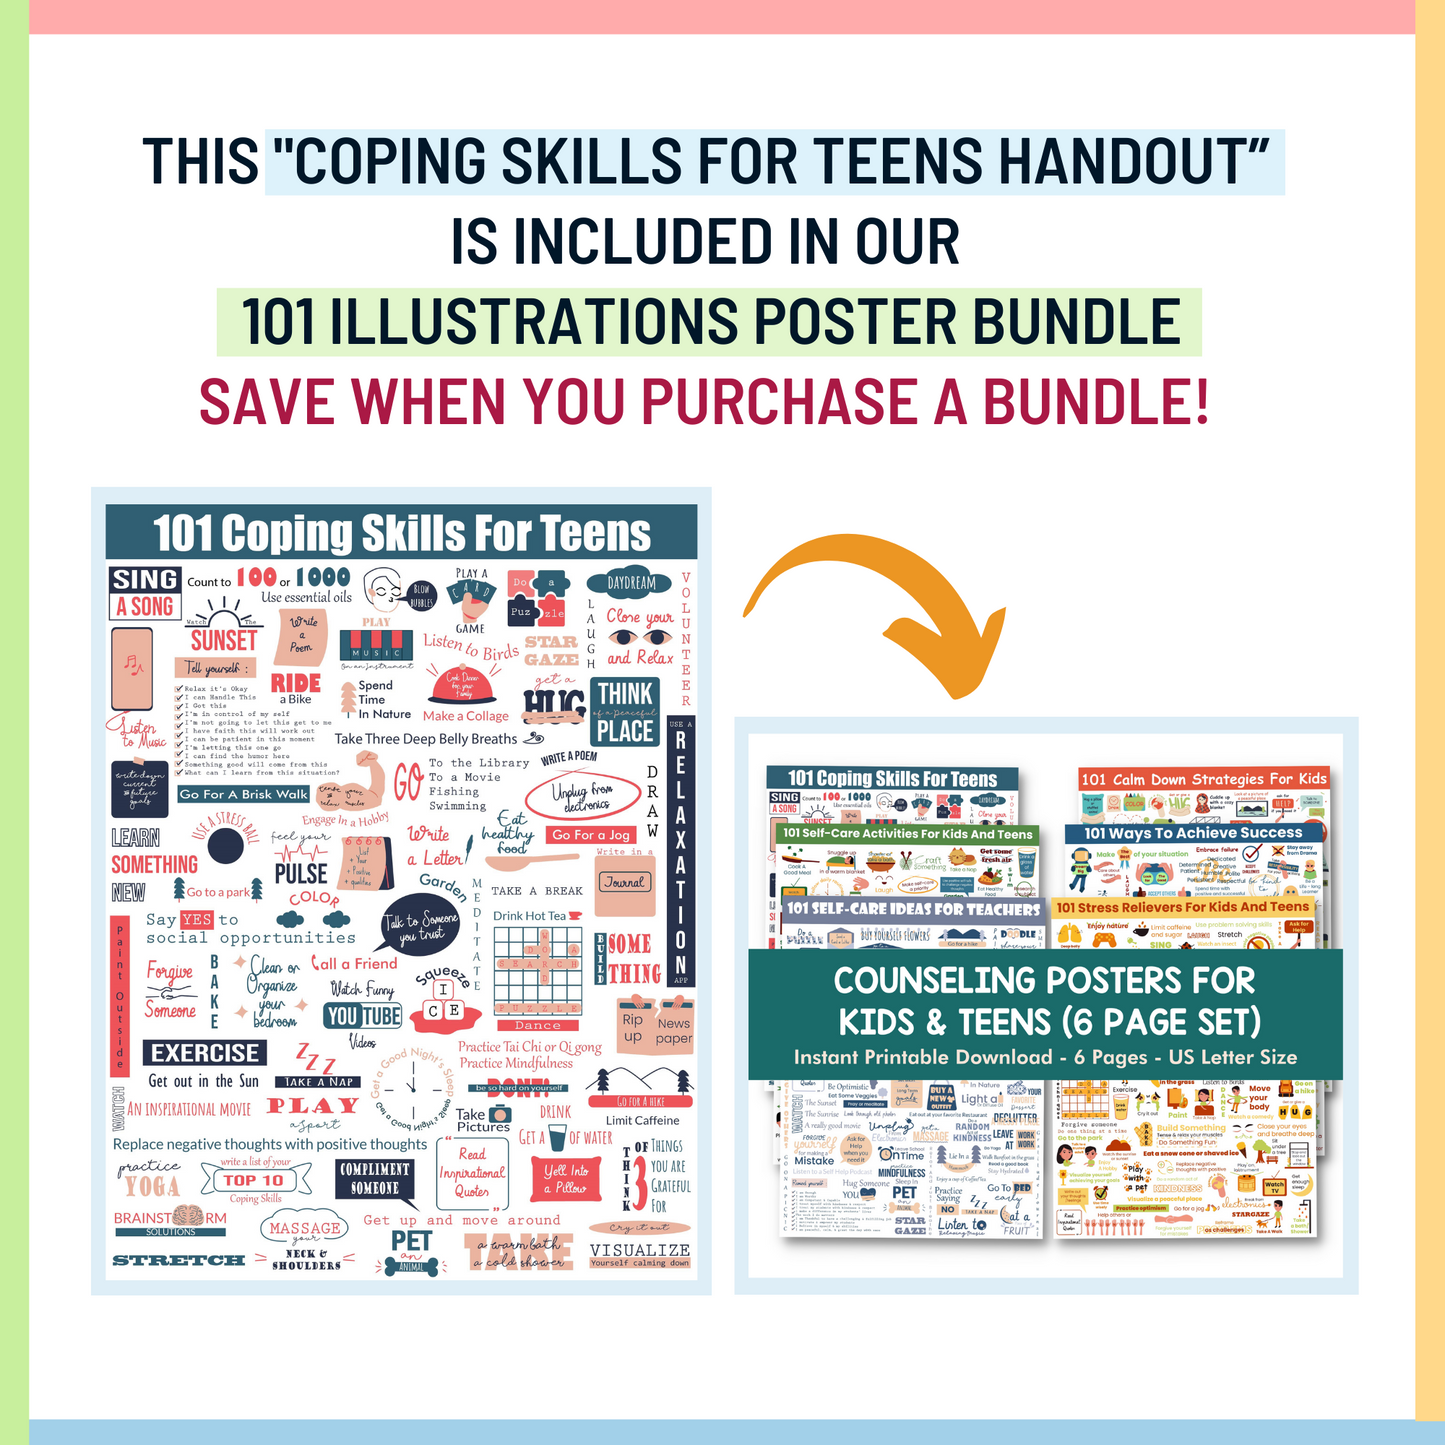 Coping Skills for Teens (PDF)